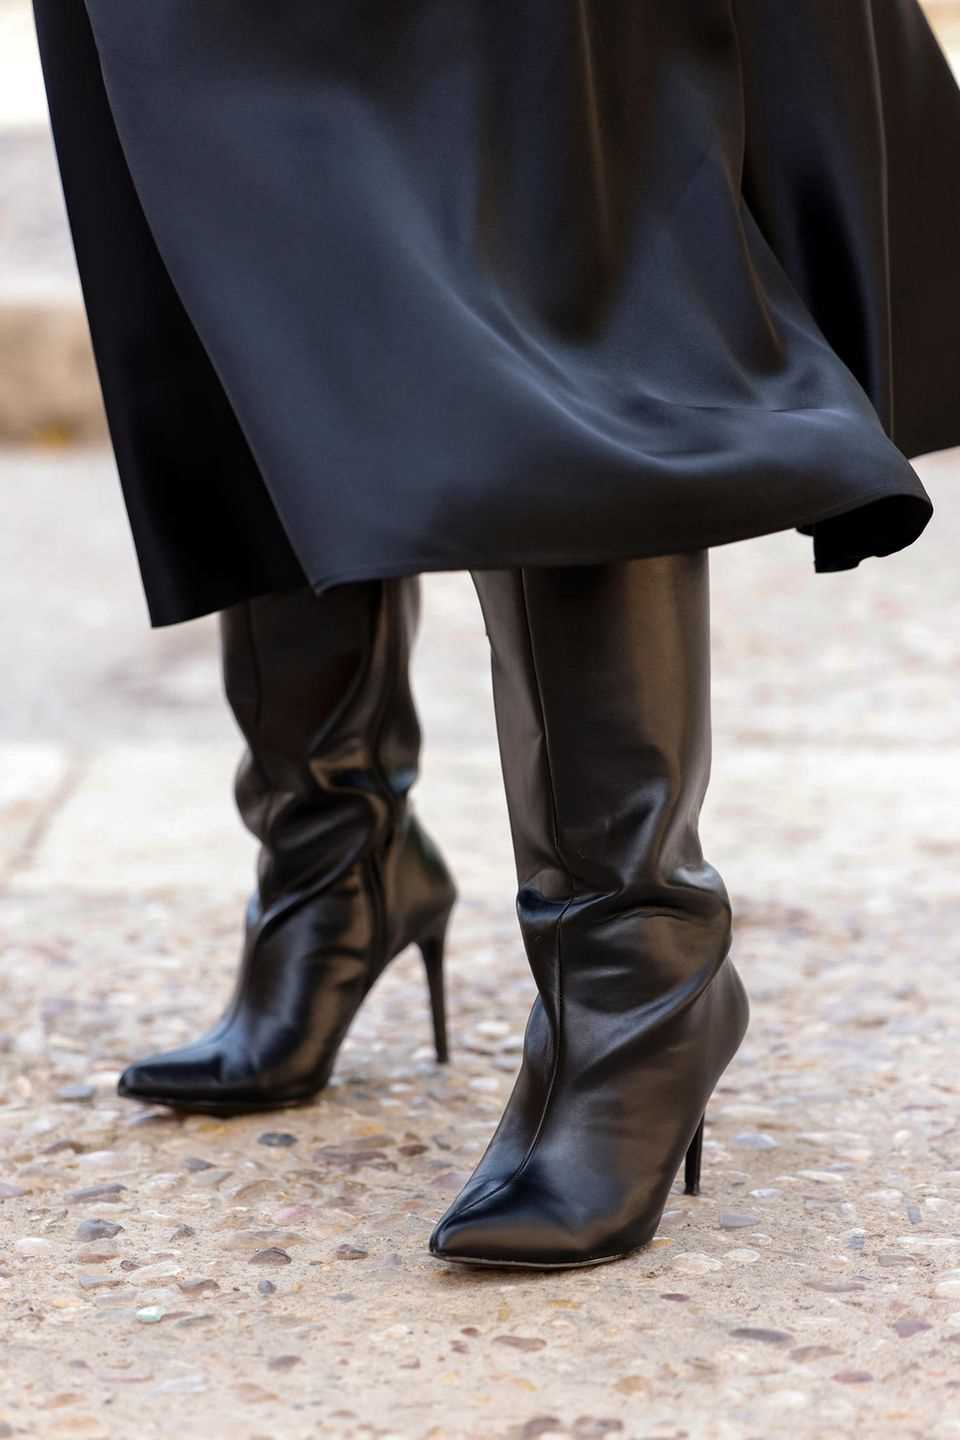 A woman wears black over-the-knee boots and a black skirt